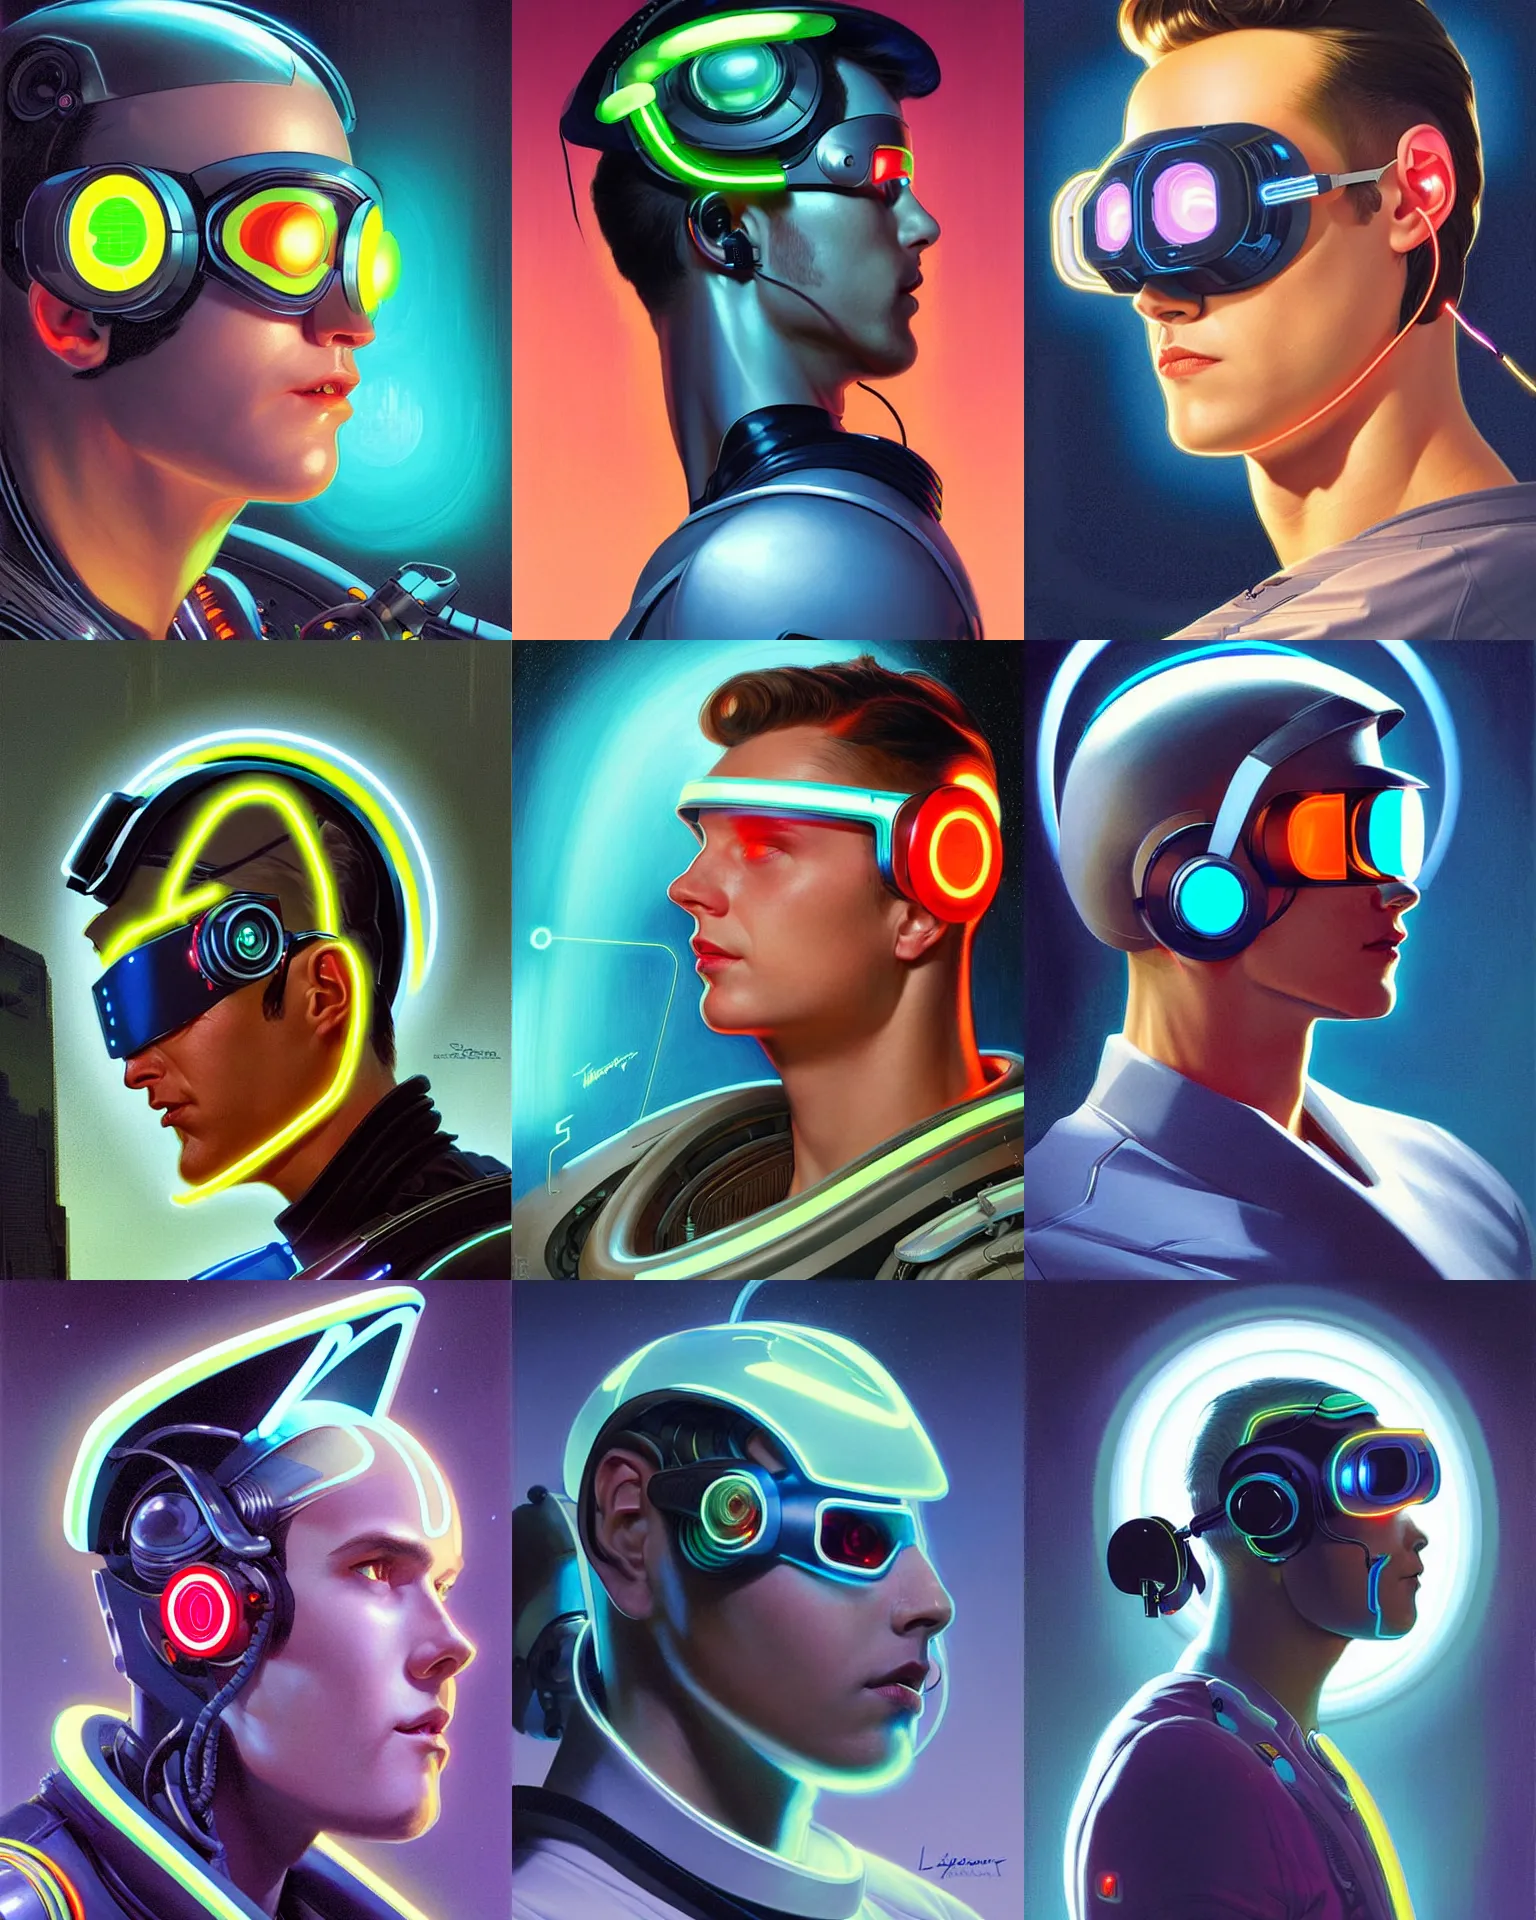 Prompt: sillouete side view future coder man, stylized cyclops display over eyes and sleek glowing headset, neon accents, holographic colors, desaturated headshot portrait digital painting by leyendecker, donato giancola, philip coles, ivan bilibin, john berkey, astronaut cyberpunk electric lights profile